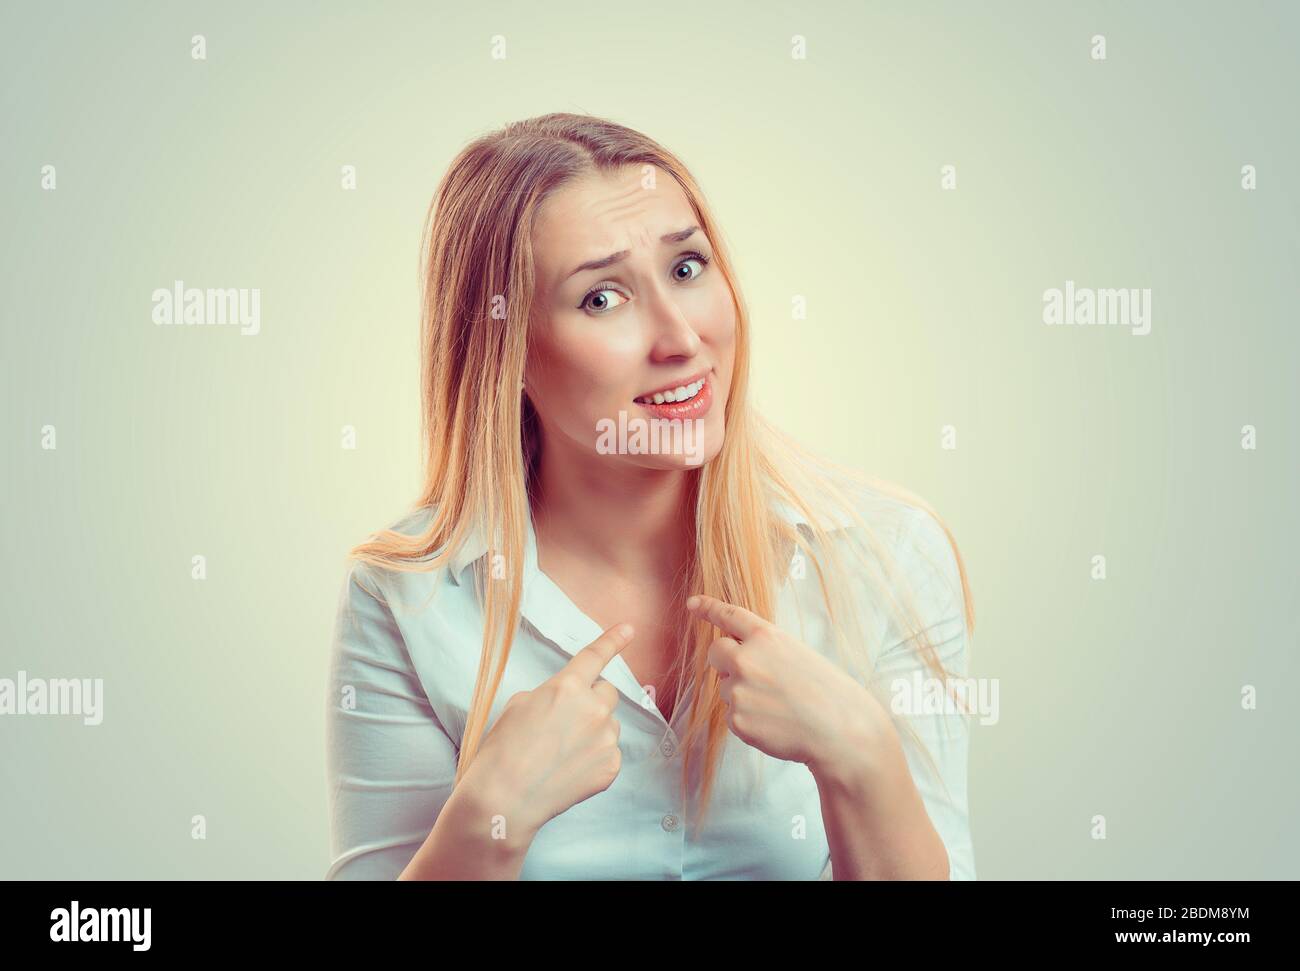 Me? Portrait of mad angry unhappy annoyed young woman getting mad asking question you talking to me, you mean me? really? Isolated on green yellow wal Stock Photo